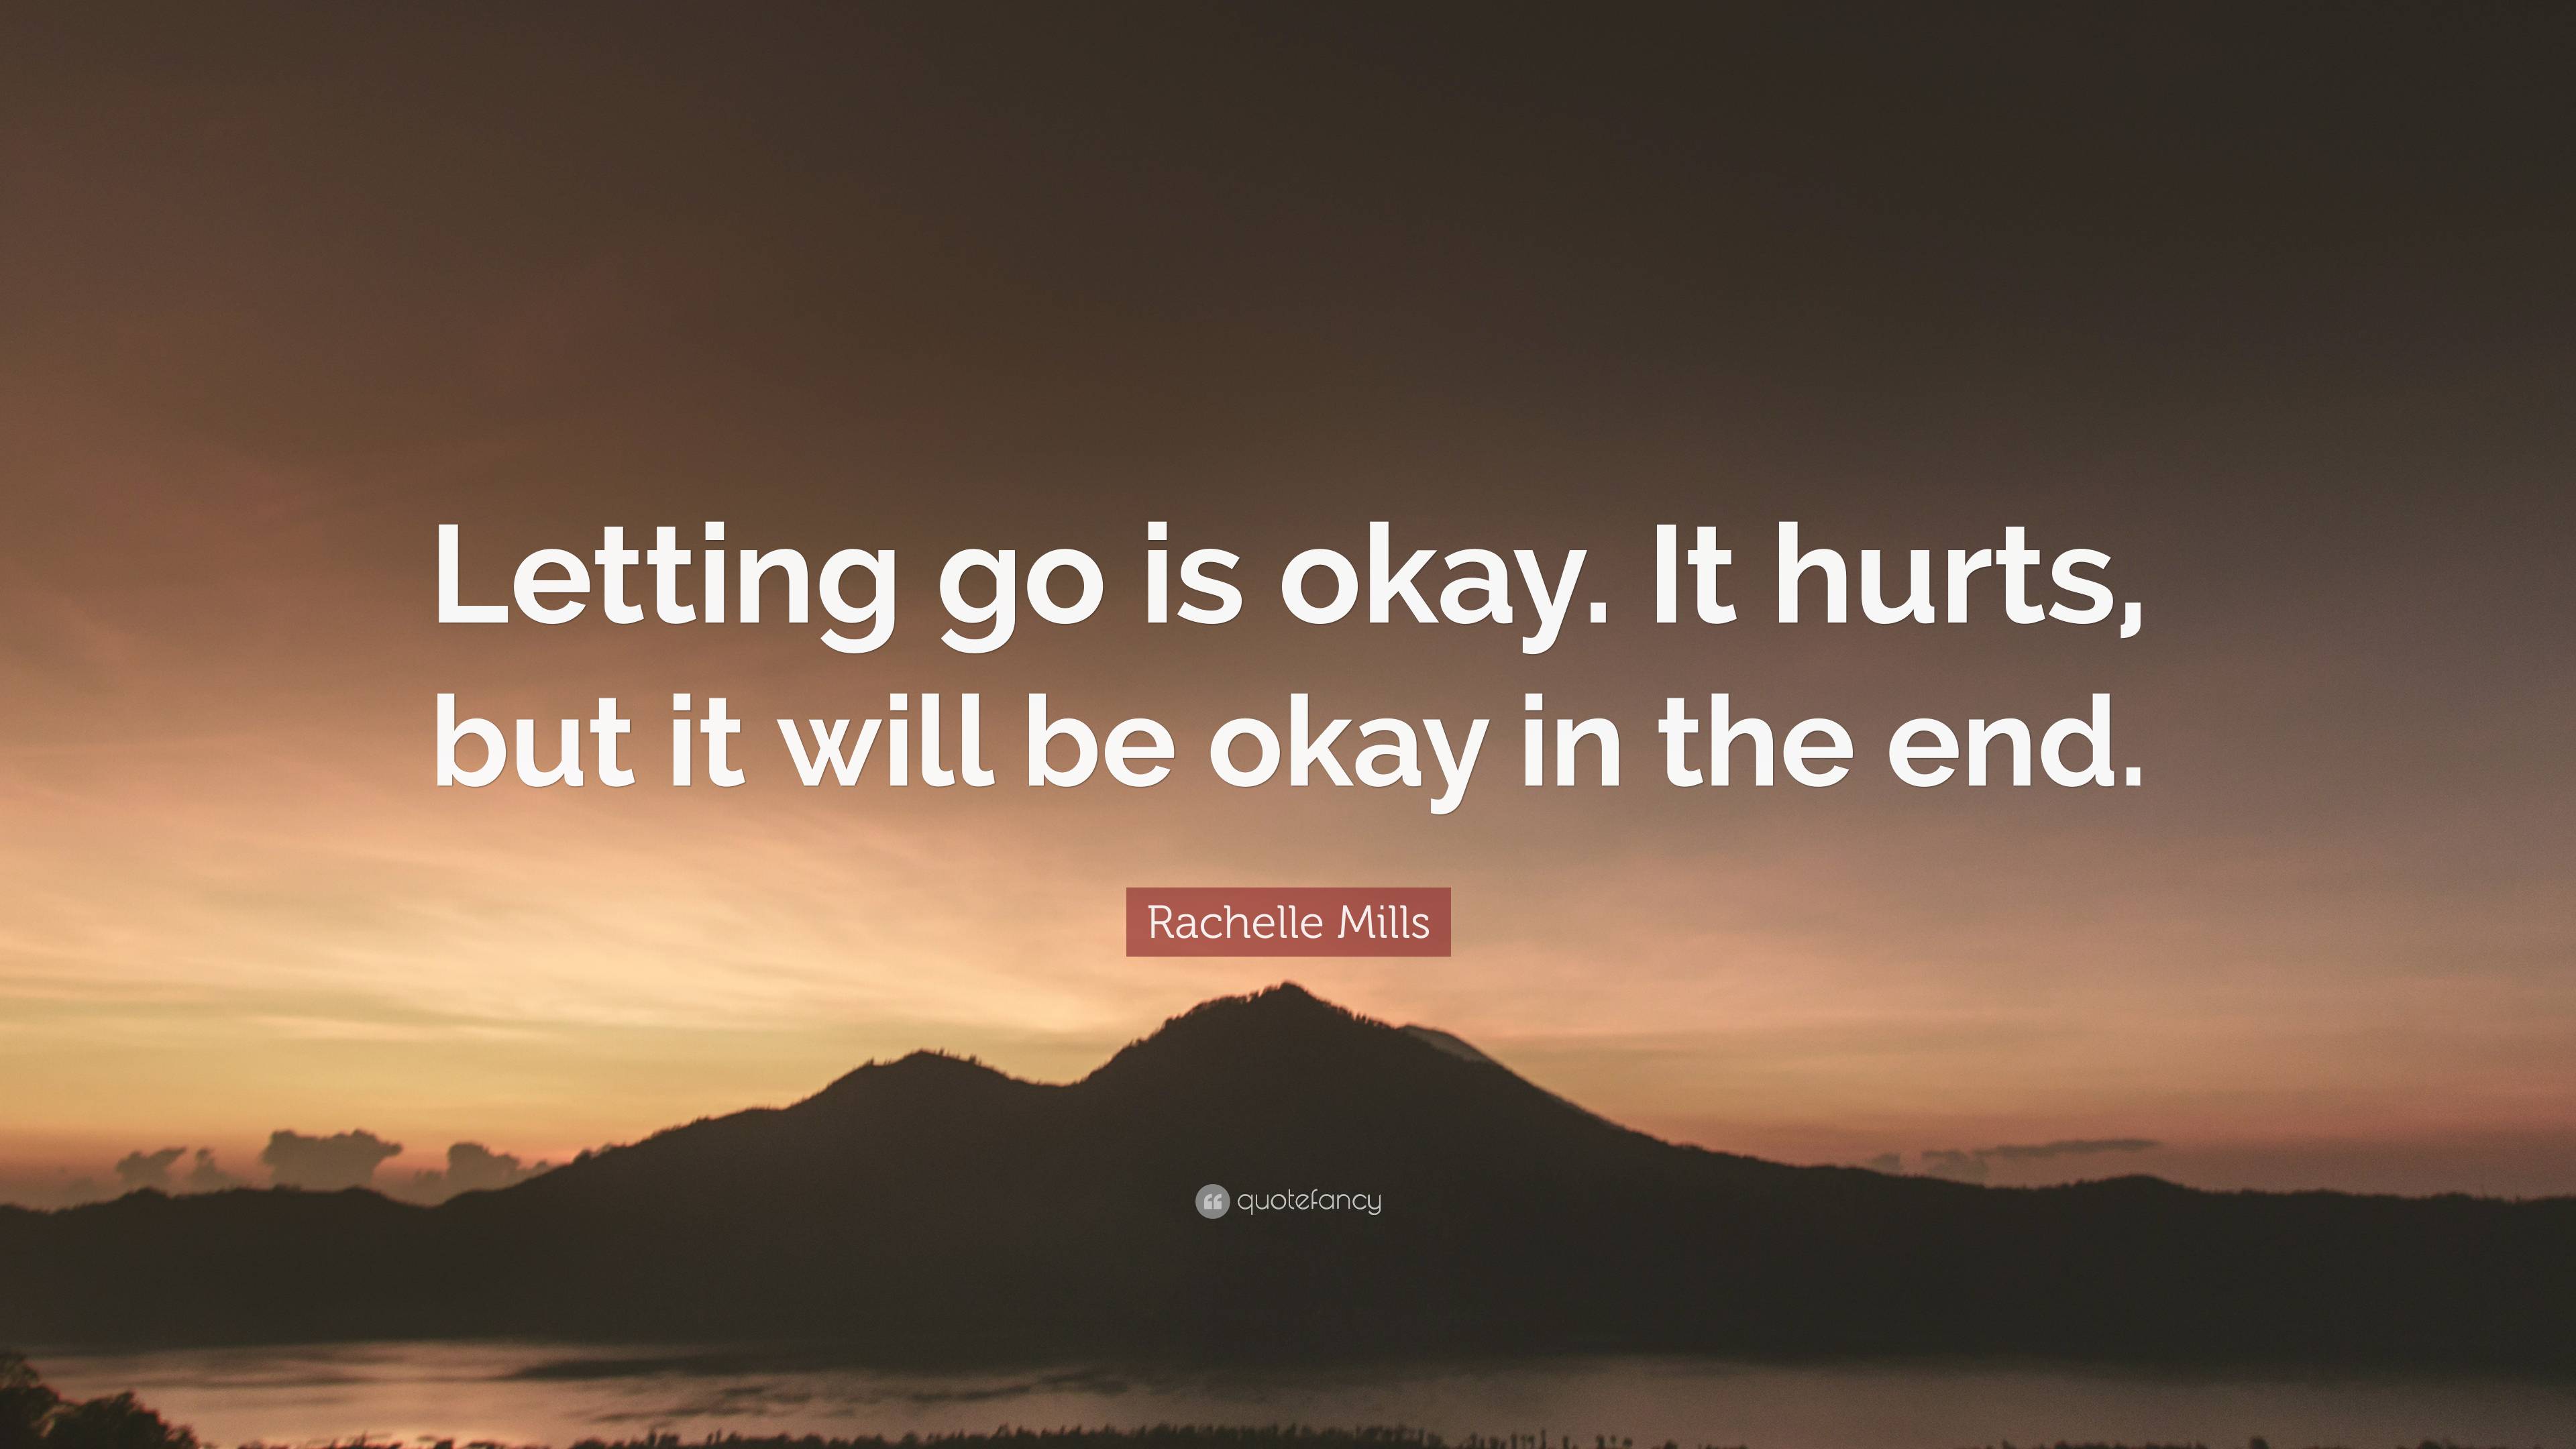 Rachelle Mills Quote: “Letting go is okay. It hurts, but it will be ...